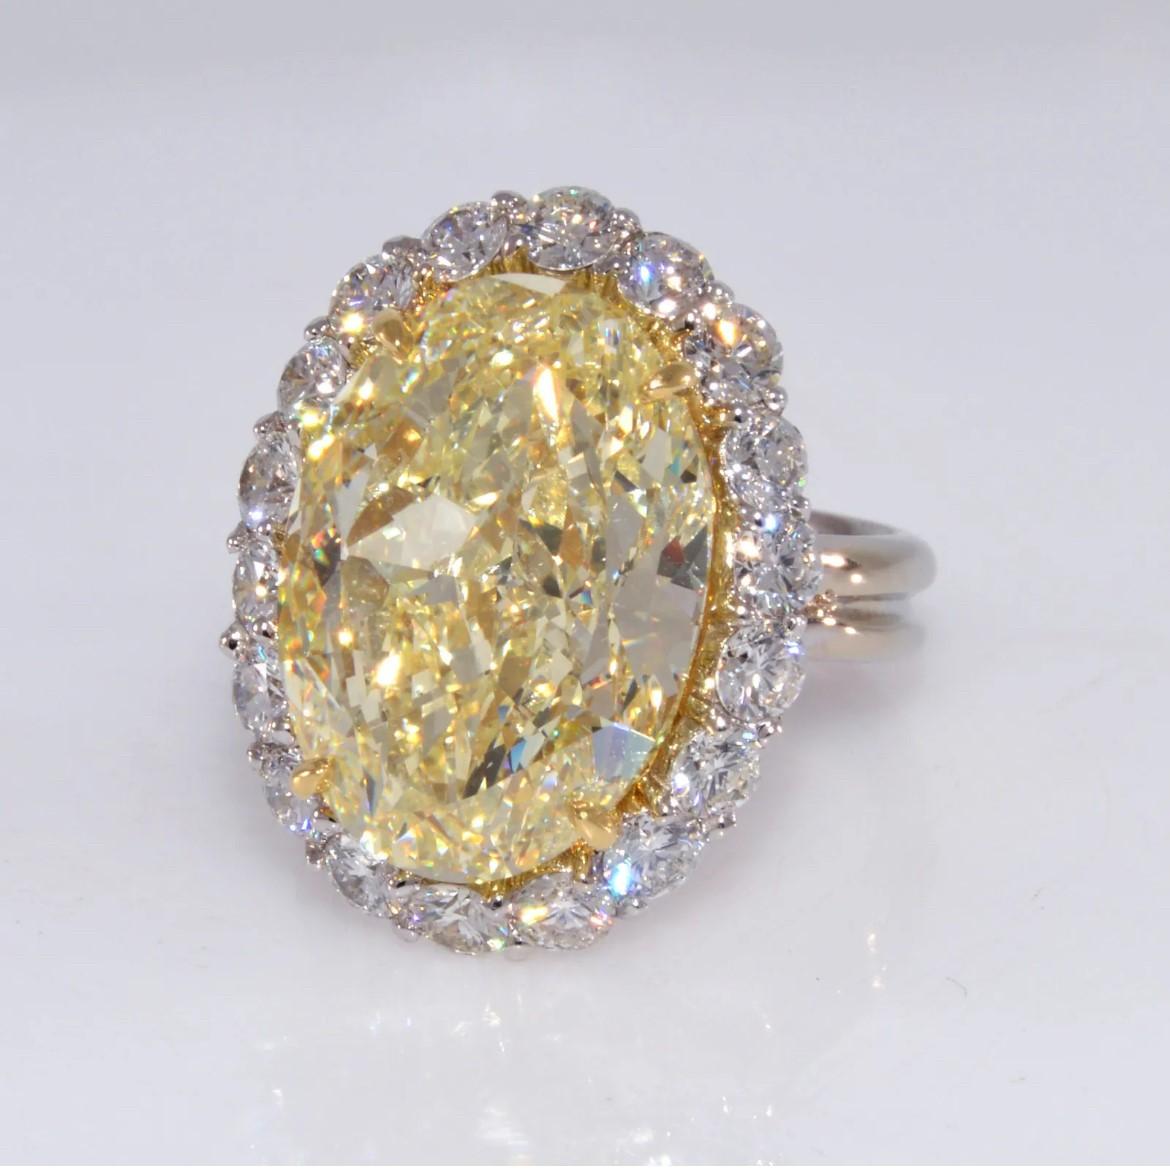 A gorgeous oval cut GIA certified 12.71 carat fancy light yellow diamond set in 18k white gold. This stunning halo setting has 18 beautiful white diamonds set in a handmade ring setting. Ring size is 6.5, and this ring is preowned.